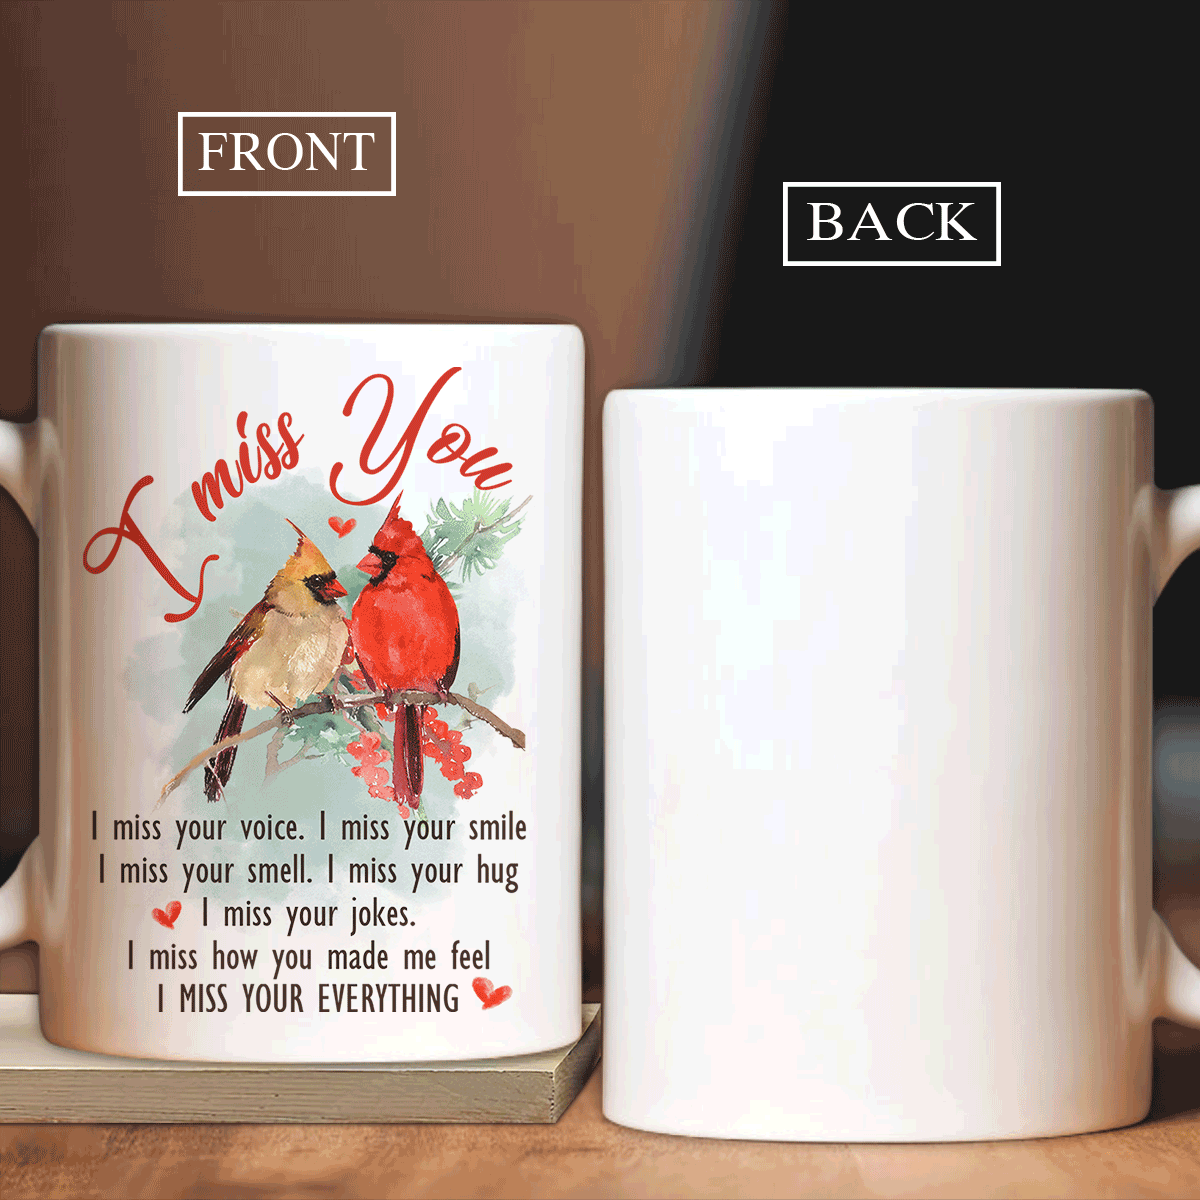 Memorial White Mug - Watercolor cardinal, Cranberry drawing - Gift for members family - I miss your voice, I miss your smile - Heaven White Mug.